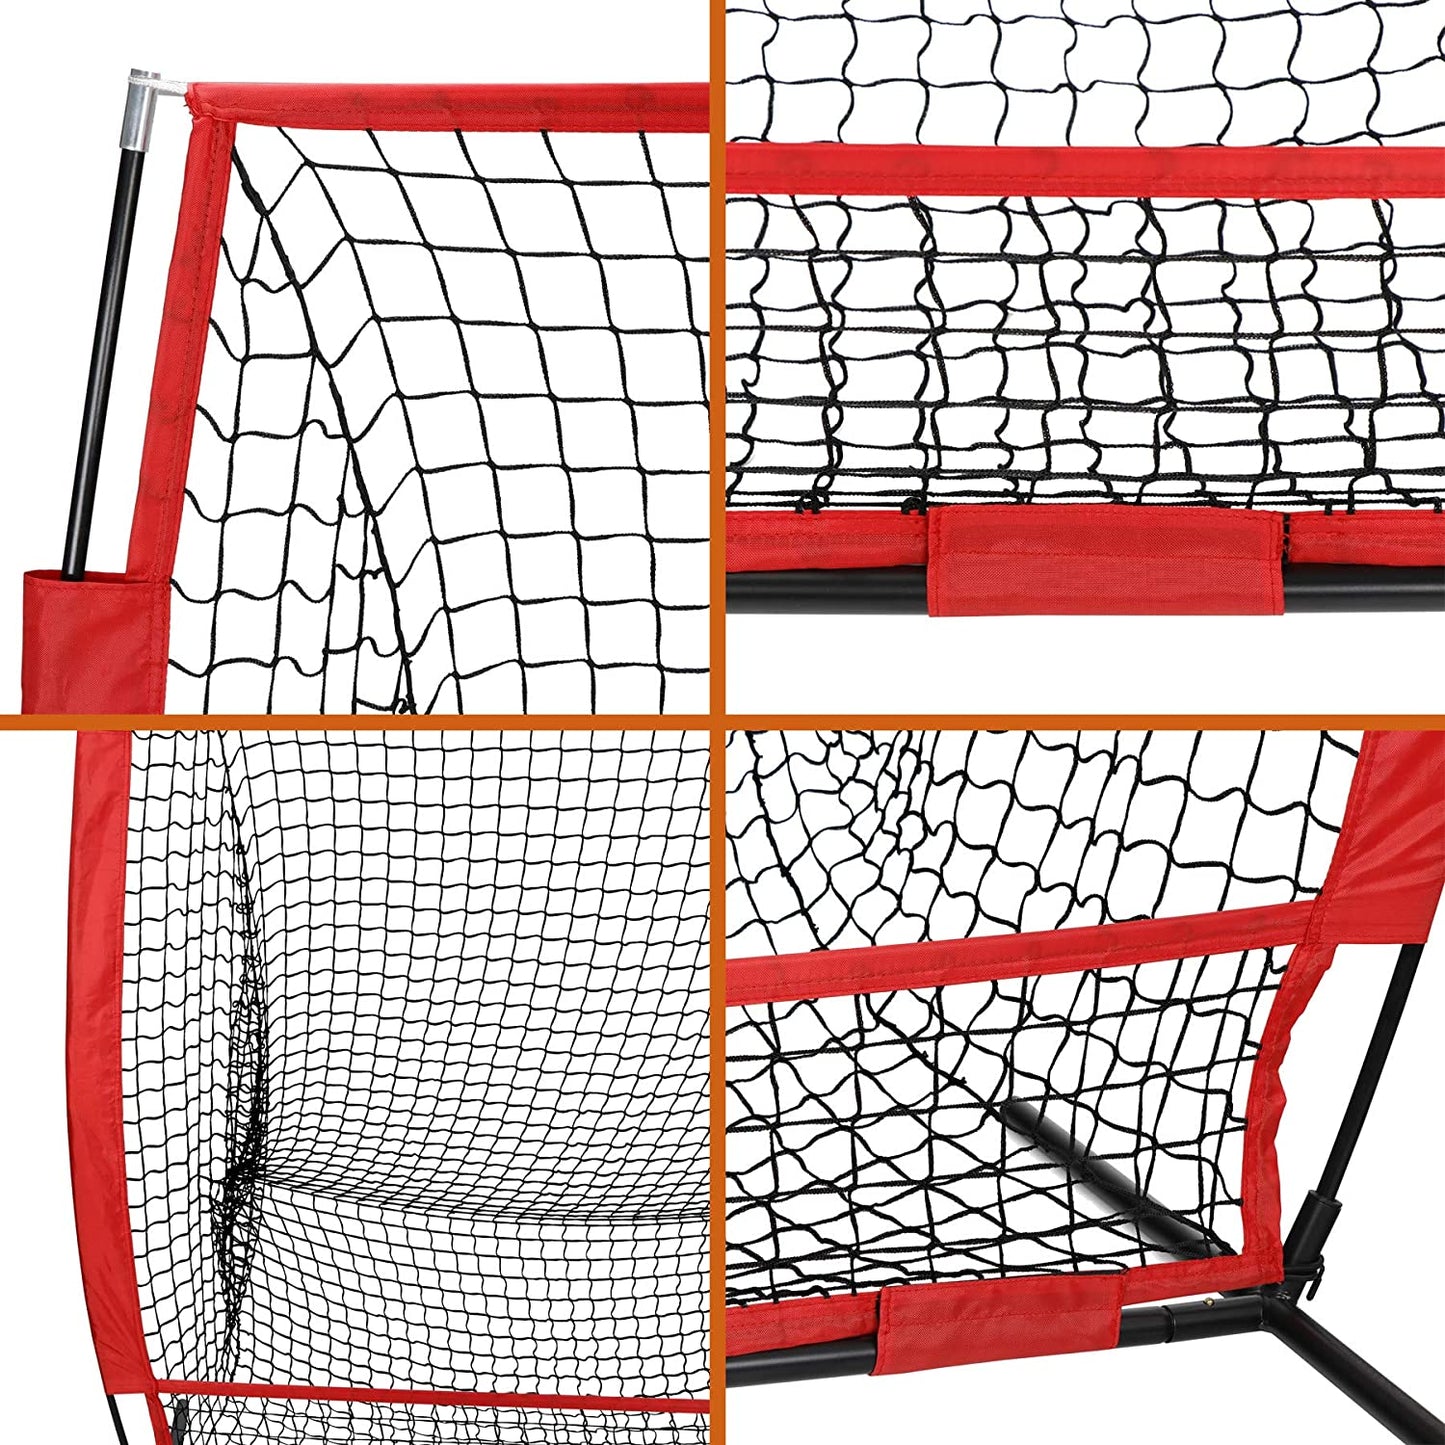 Portable Baseball Softball Practice Net Hitting Pitching Batting Training Net w/Carry Bag & Metal Frame Great for Indoor Outdoor Practice